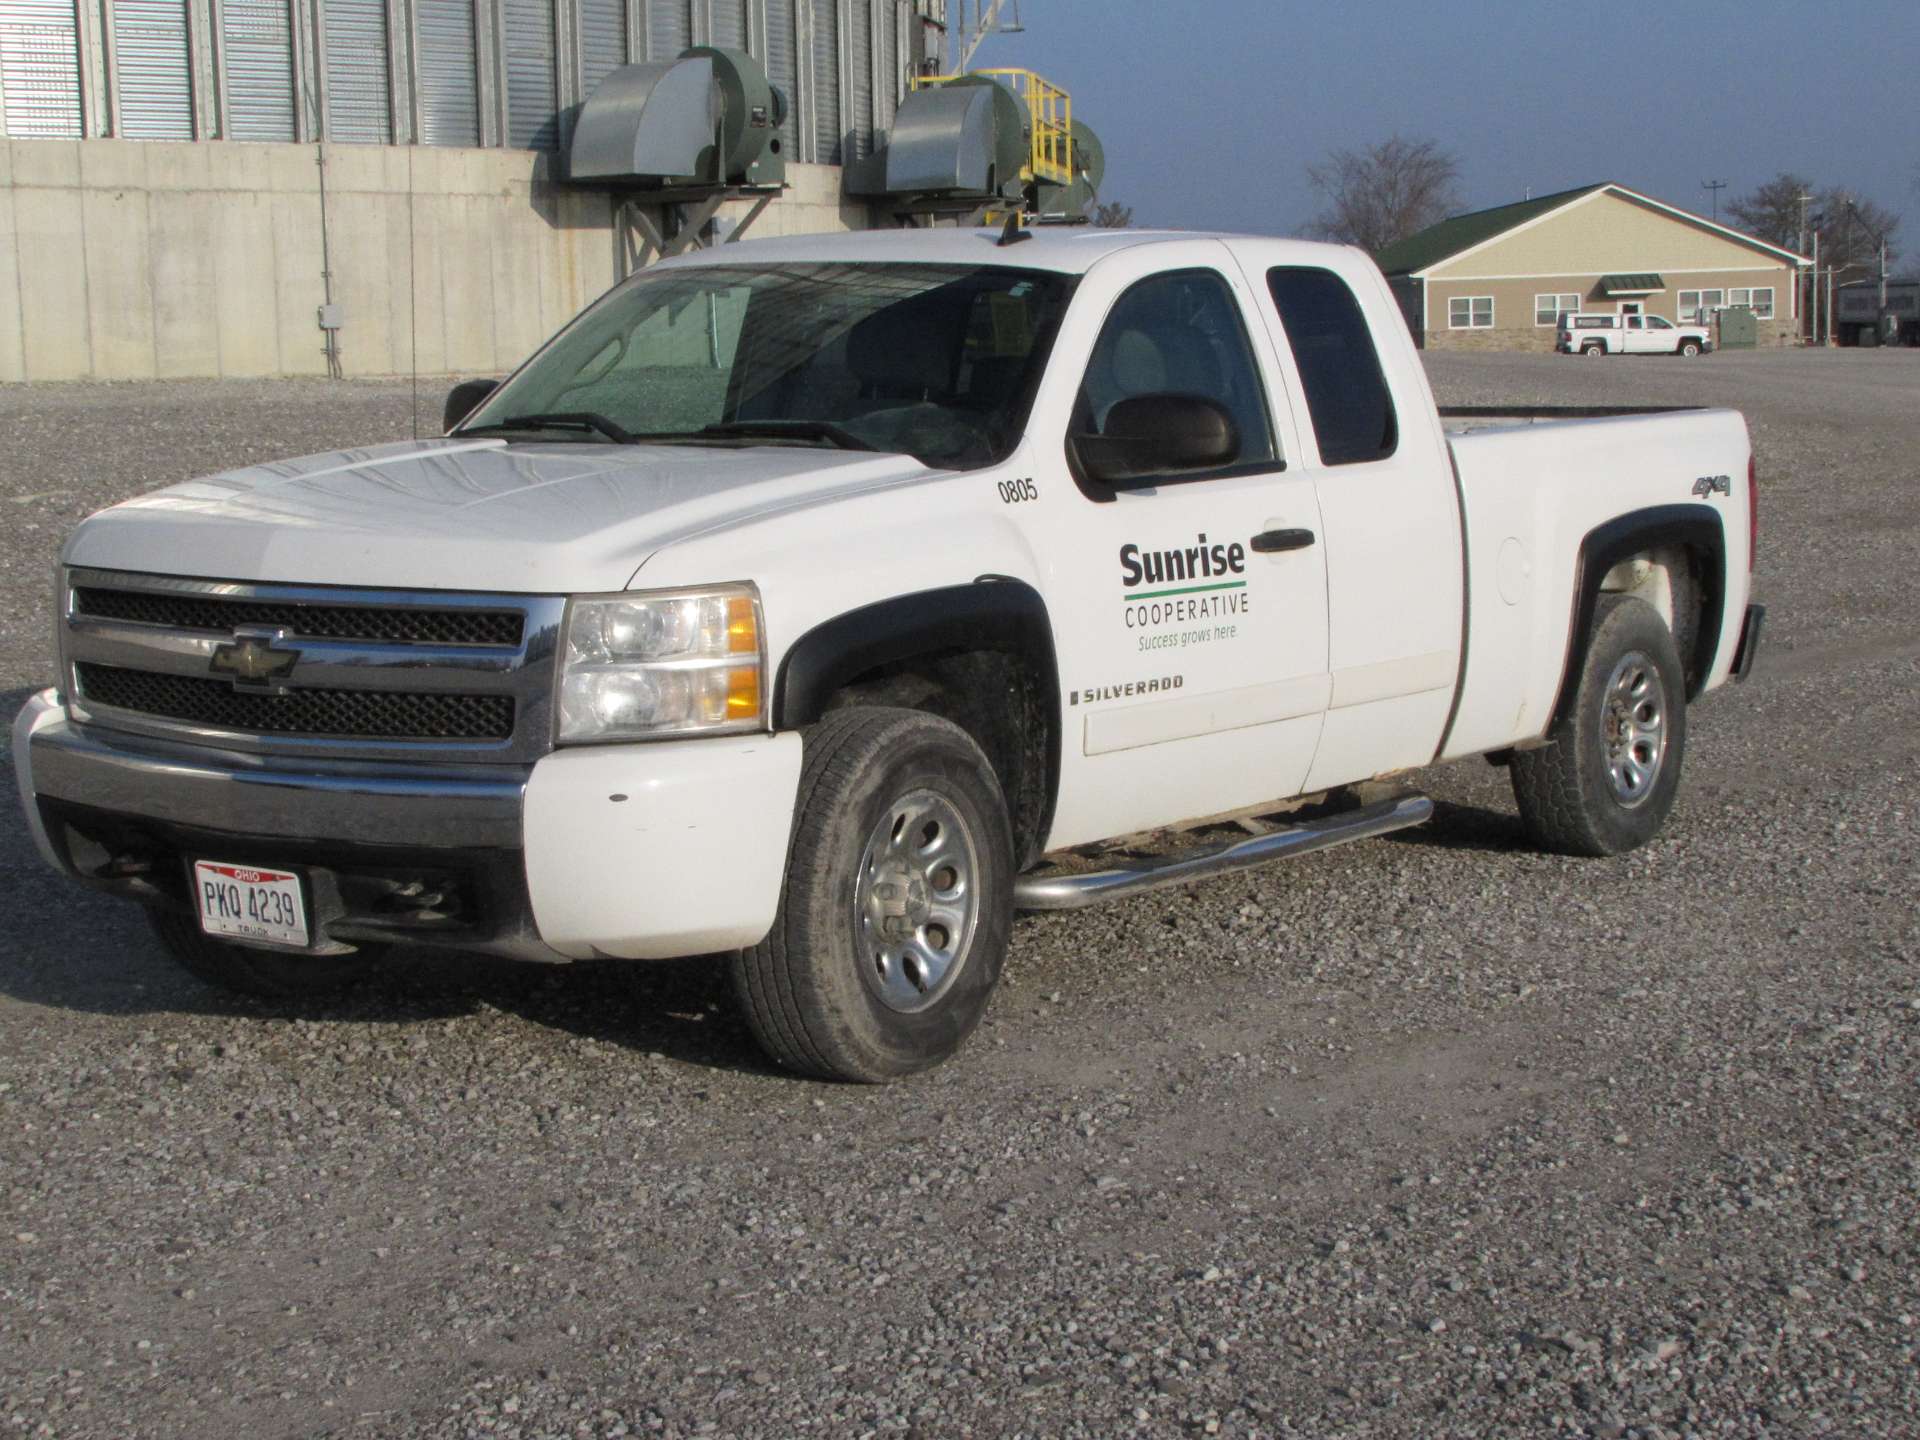 2008 Chevy Silverado 1500 LT Pickup Truck (CRACKED FRAME) - Image 8 of 43